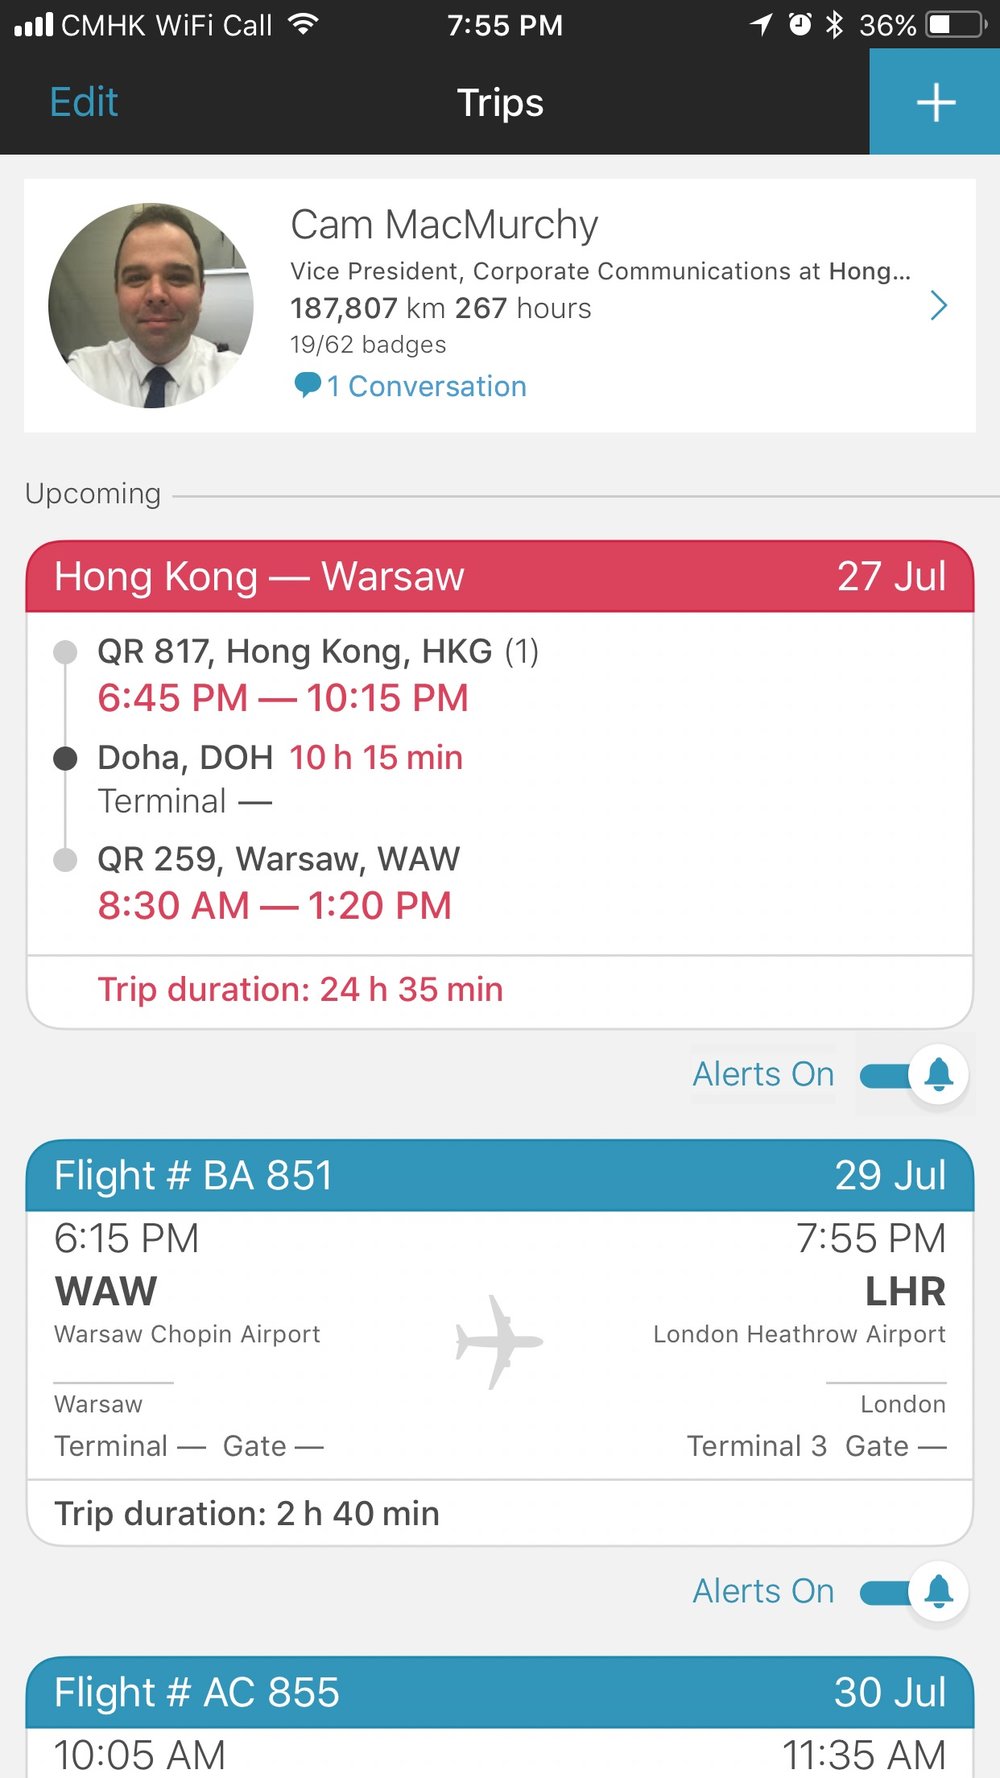  App in the Air showing my upcoming flights. 